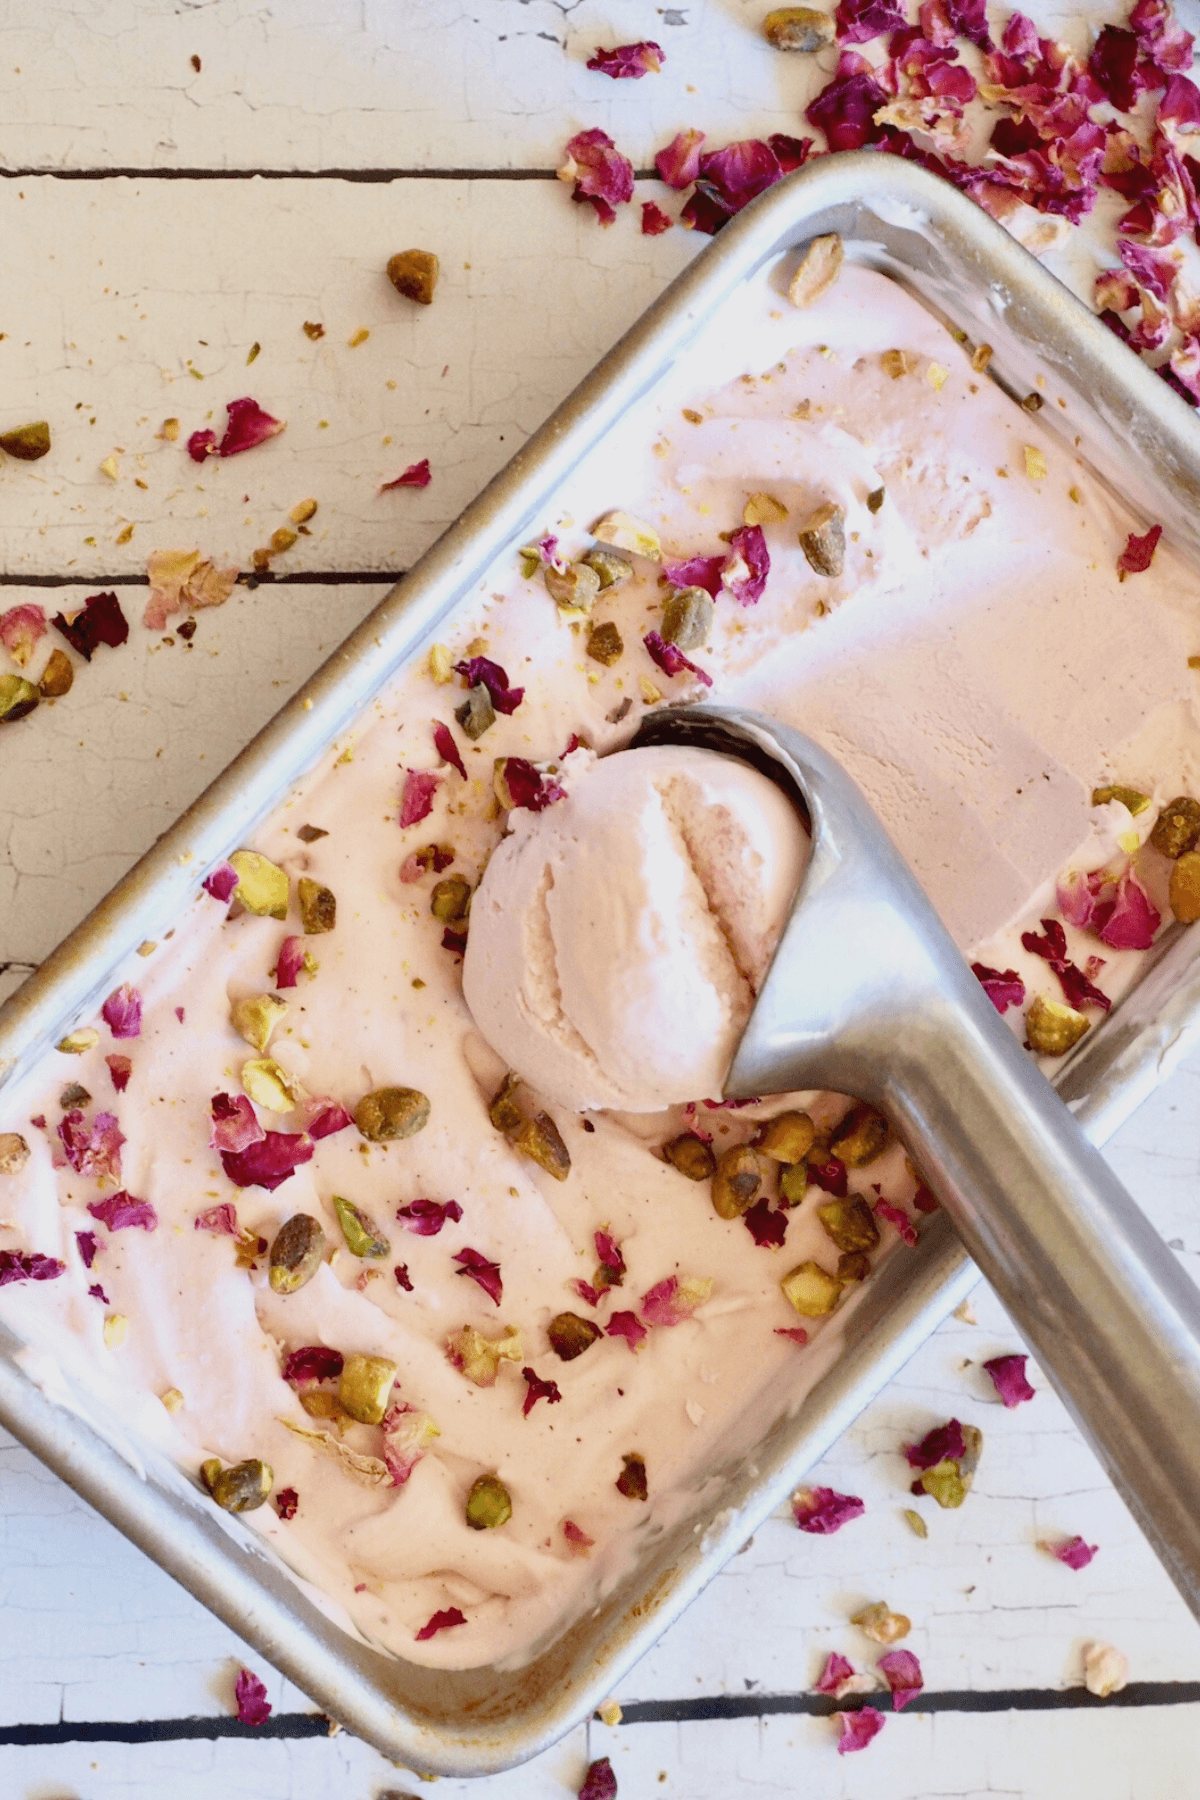 Rose ice cream in a 9x5 loaf pan with ice cream scoop scooping out a serving.